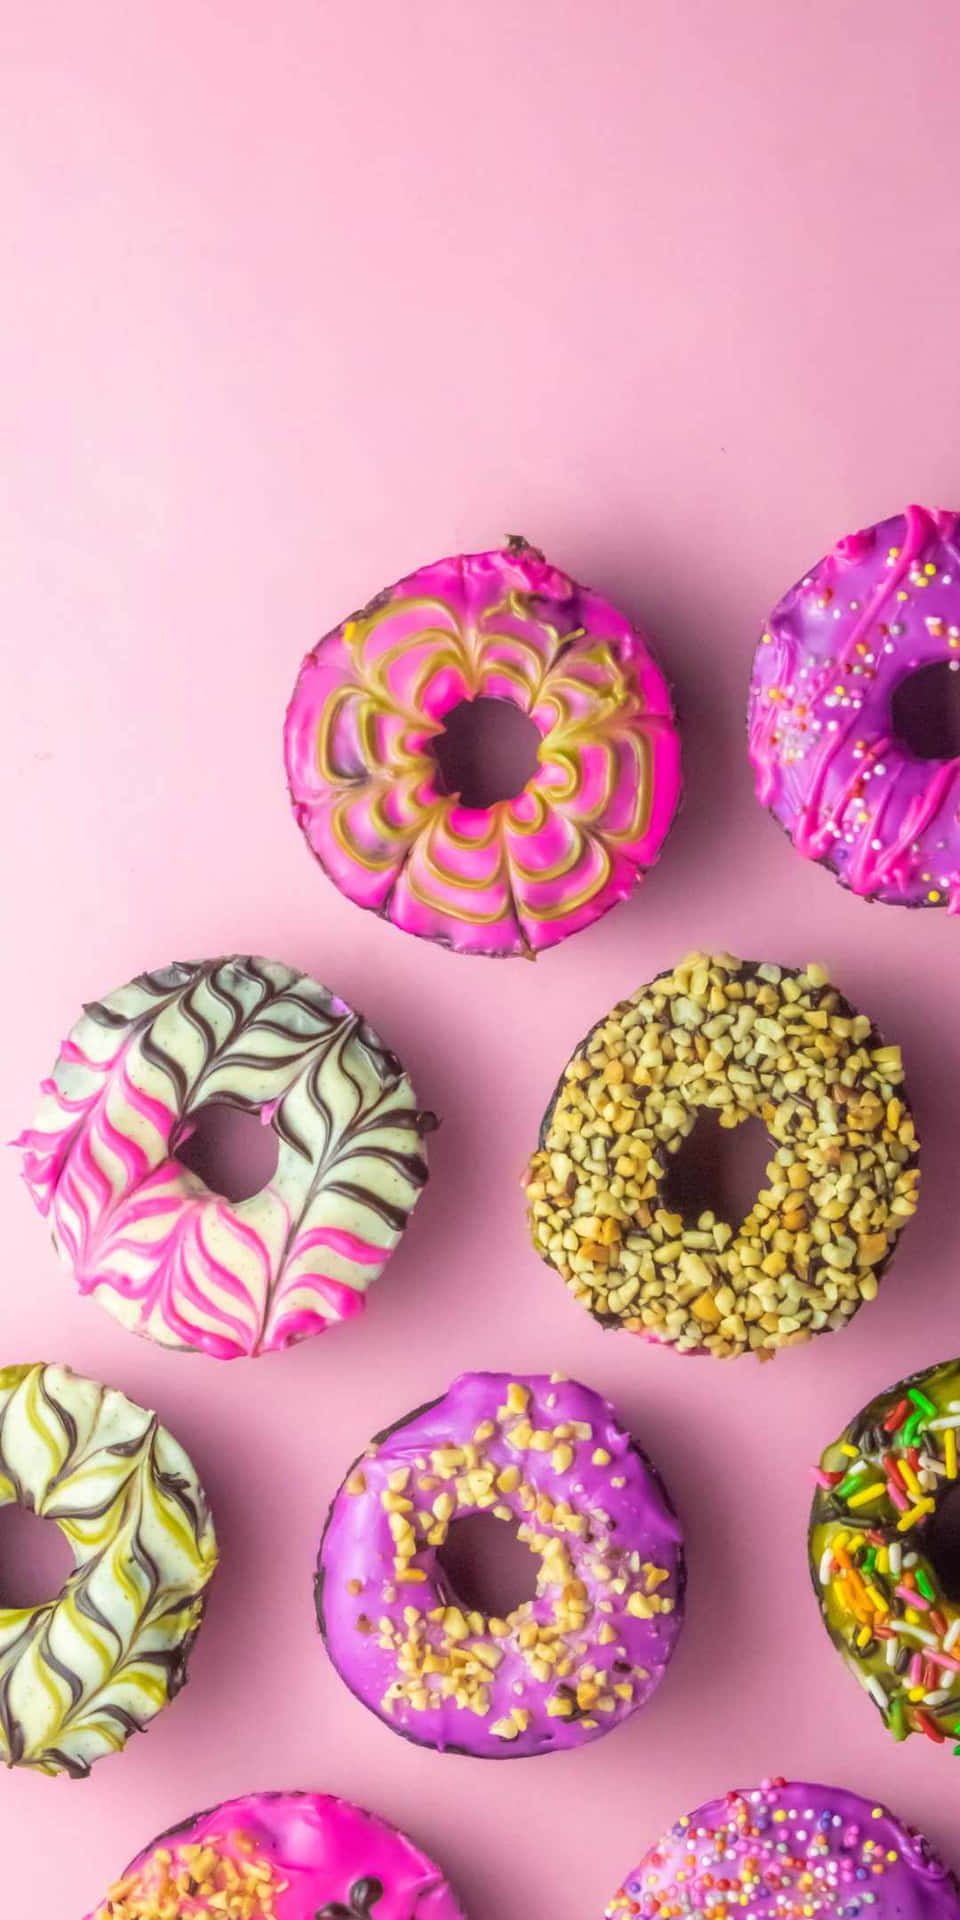 Pixel 3 Pastries Background Donuts Creative